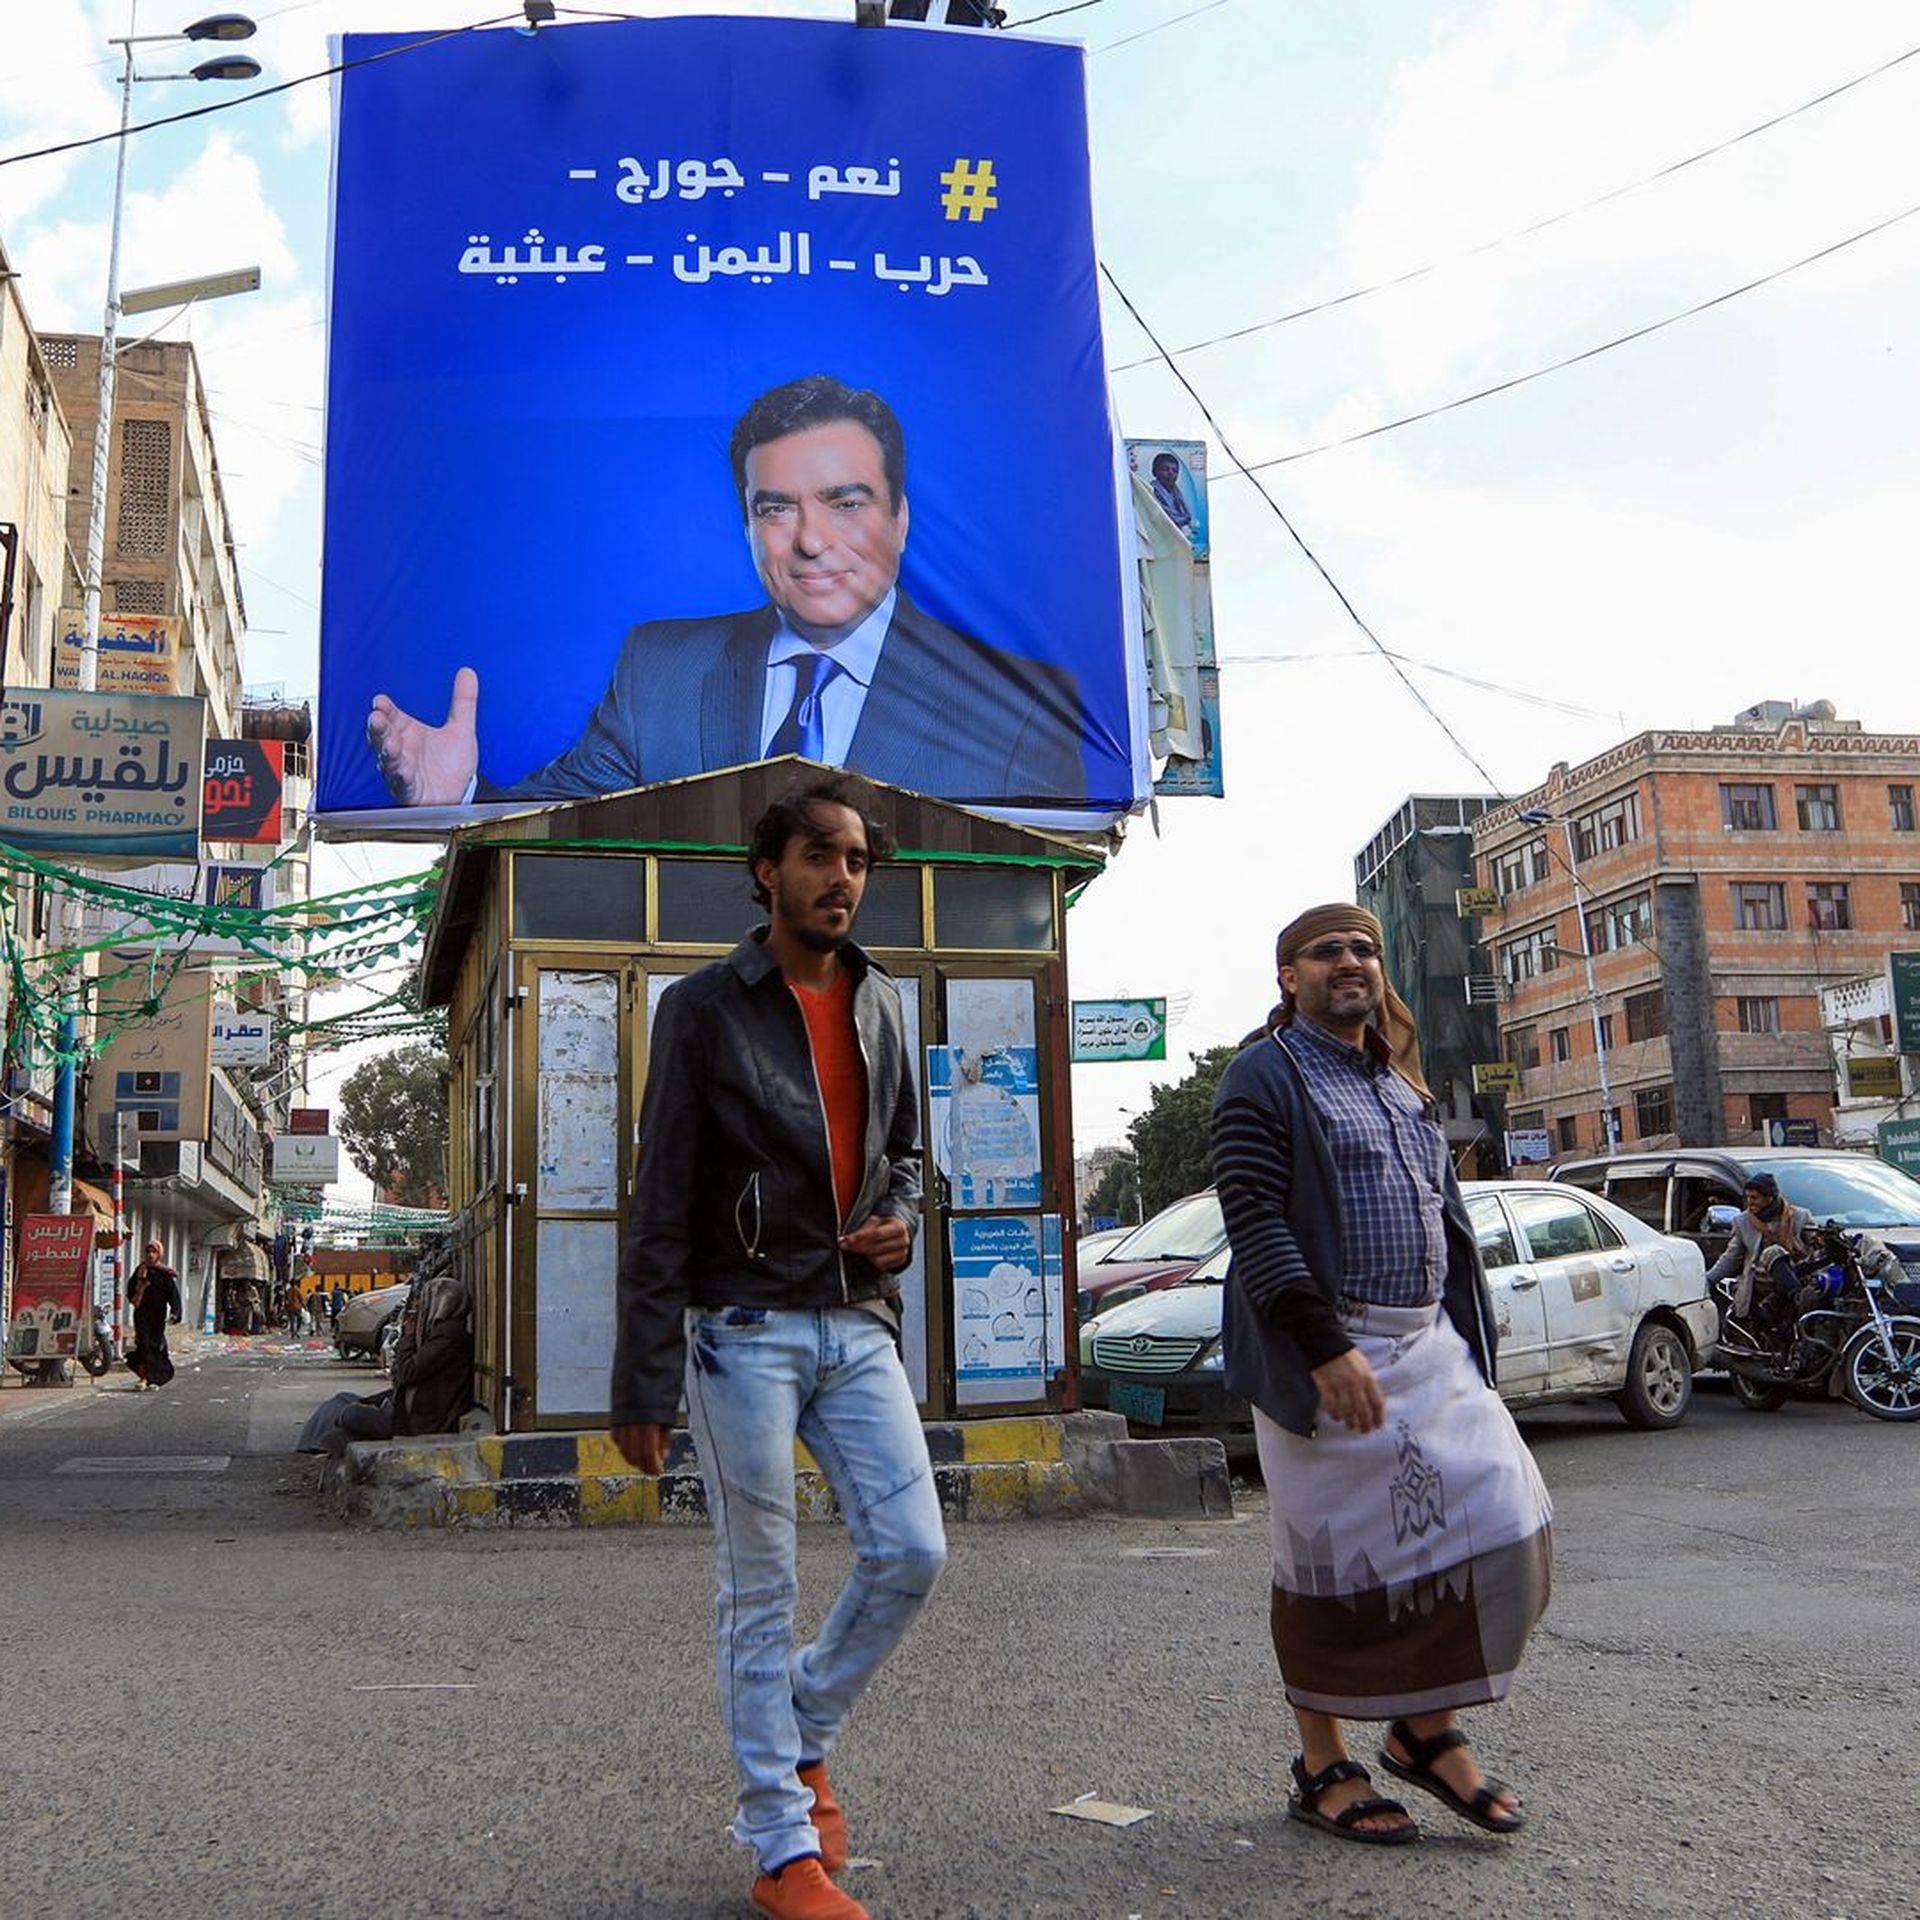 A billboard of George Kordahi in Sana'a, Yemen, put up by the Houthi rebels to support his comments on the war. Photo: Mohammed Huwais/AFP via Getty.